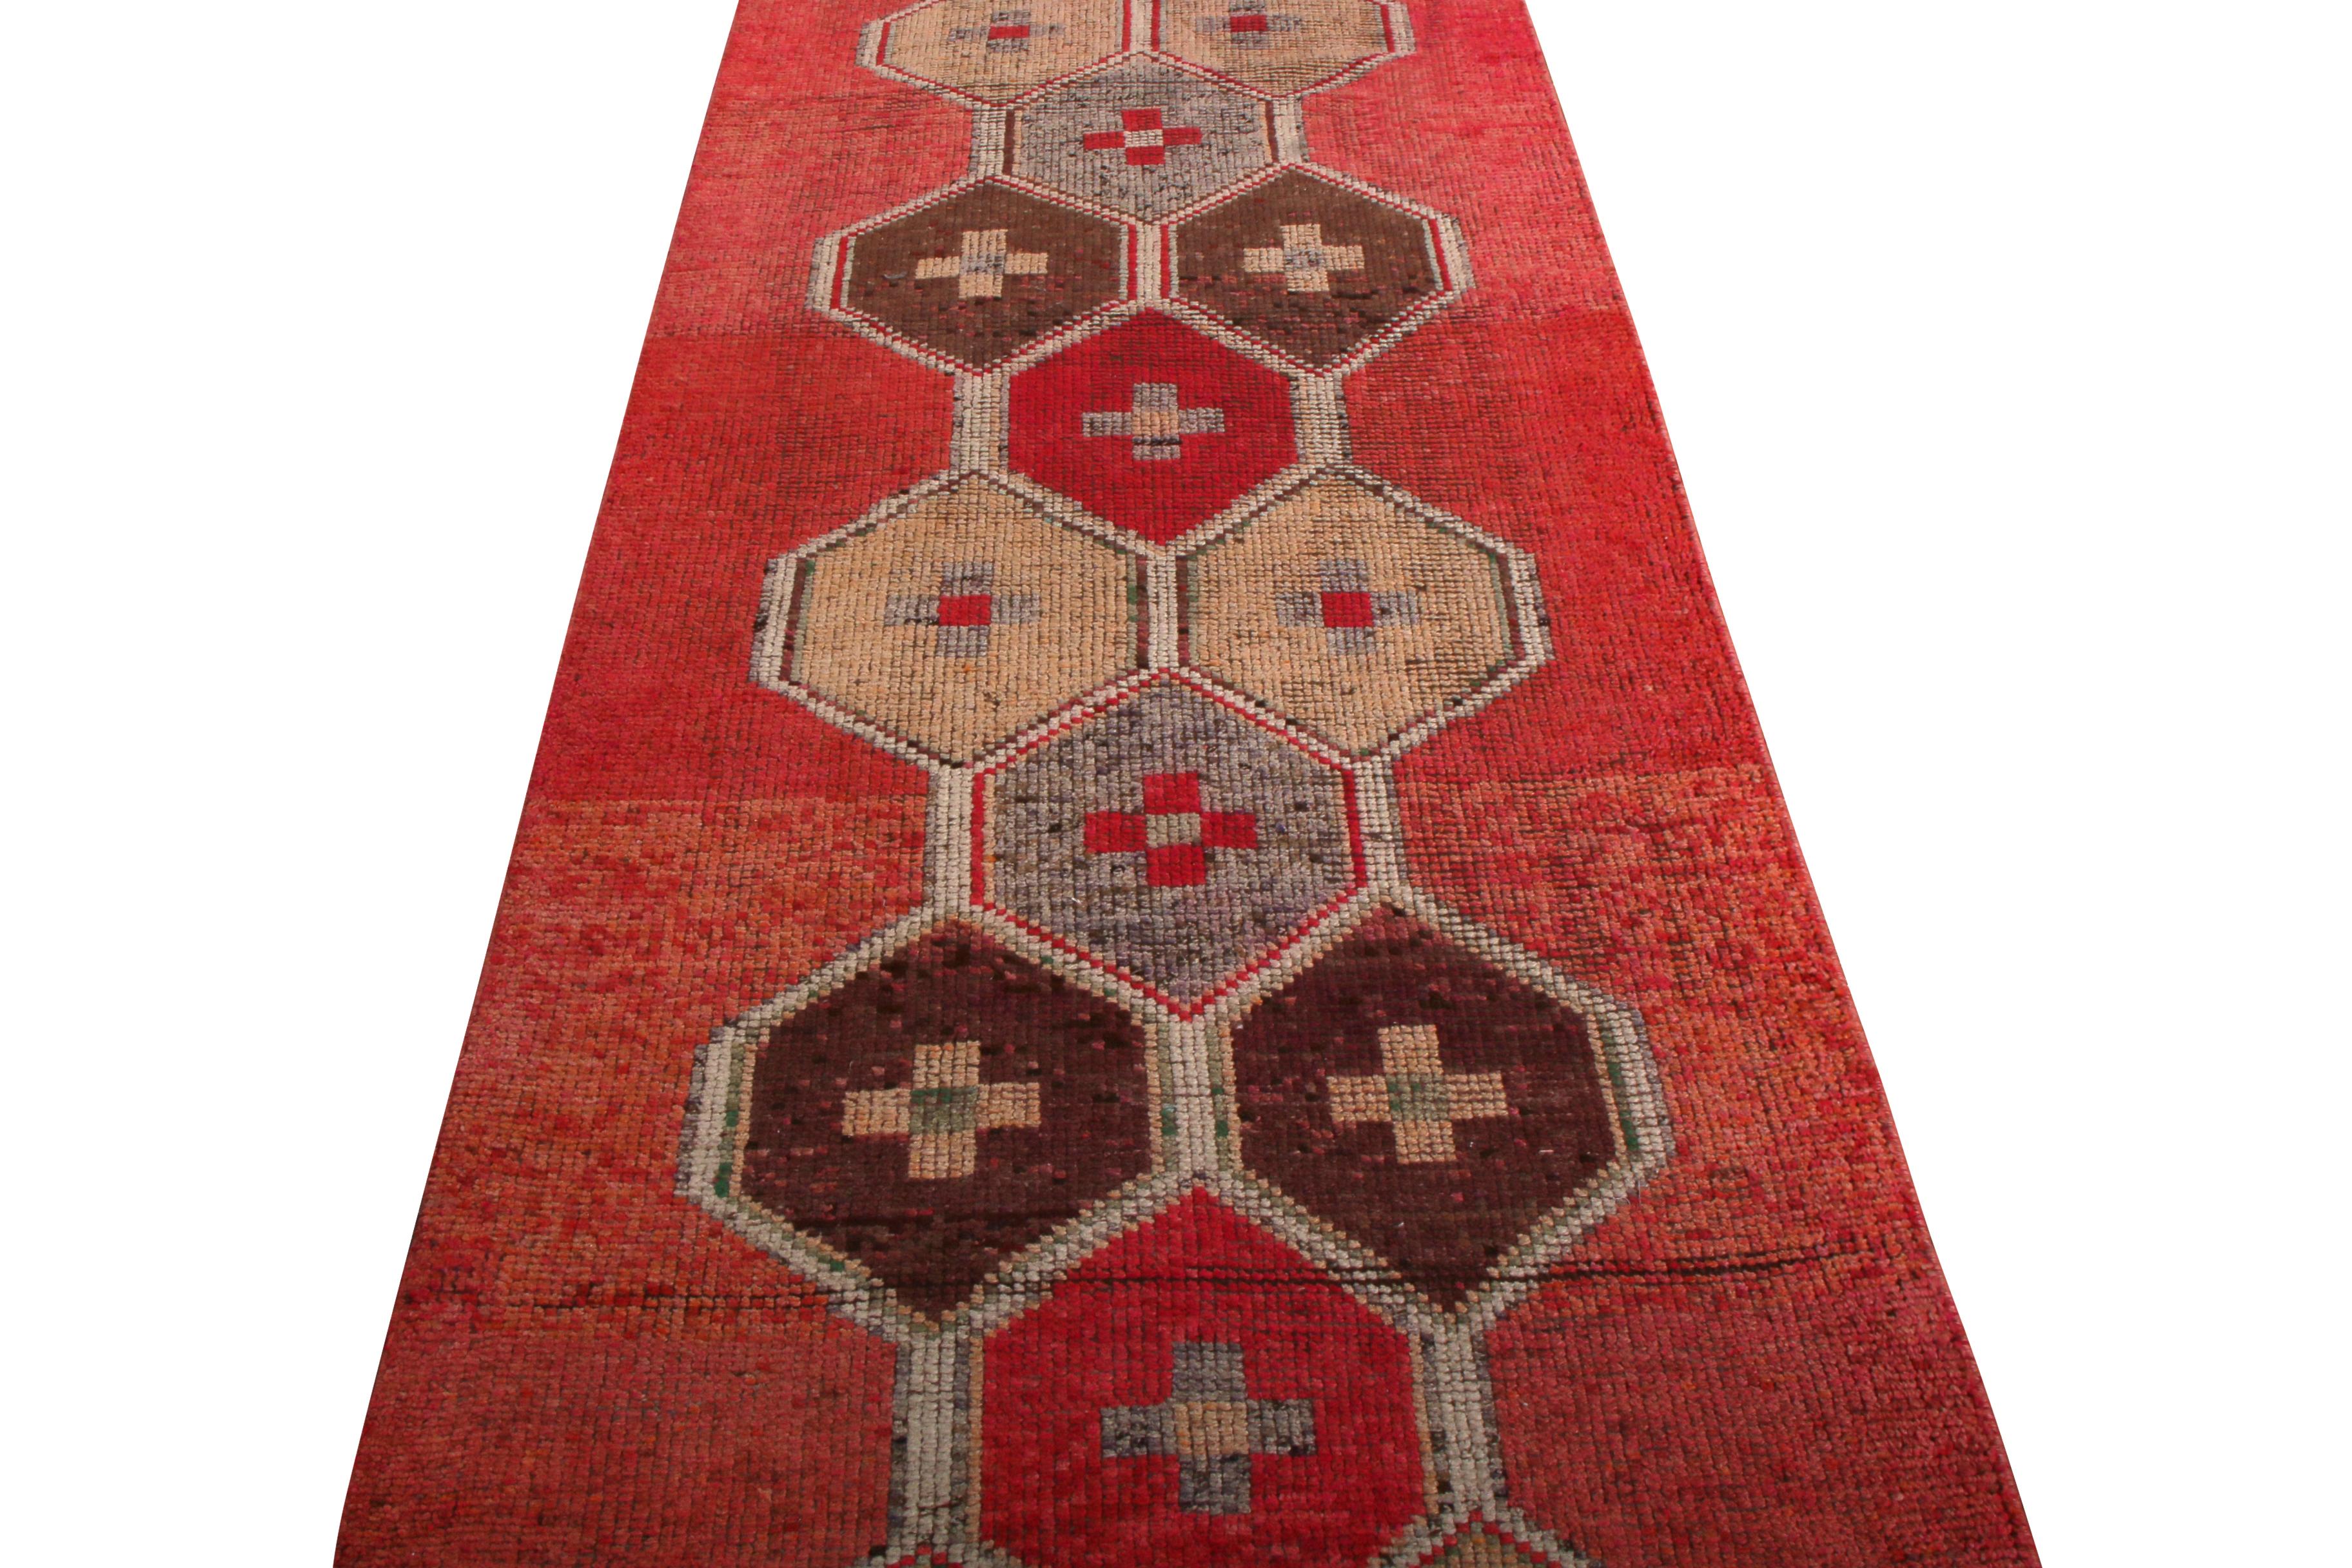 Made with handwoven wool originating from Turkey between 1950-1960, this vintage midcentury Kilim runner represents one of the most distinct new additions to our 1950s rug lines, sporting a meticulous geometric embroidery pattern against a